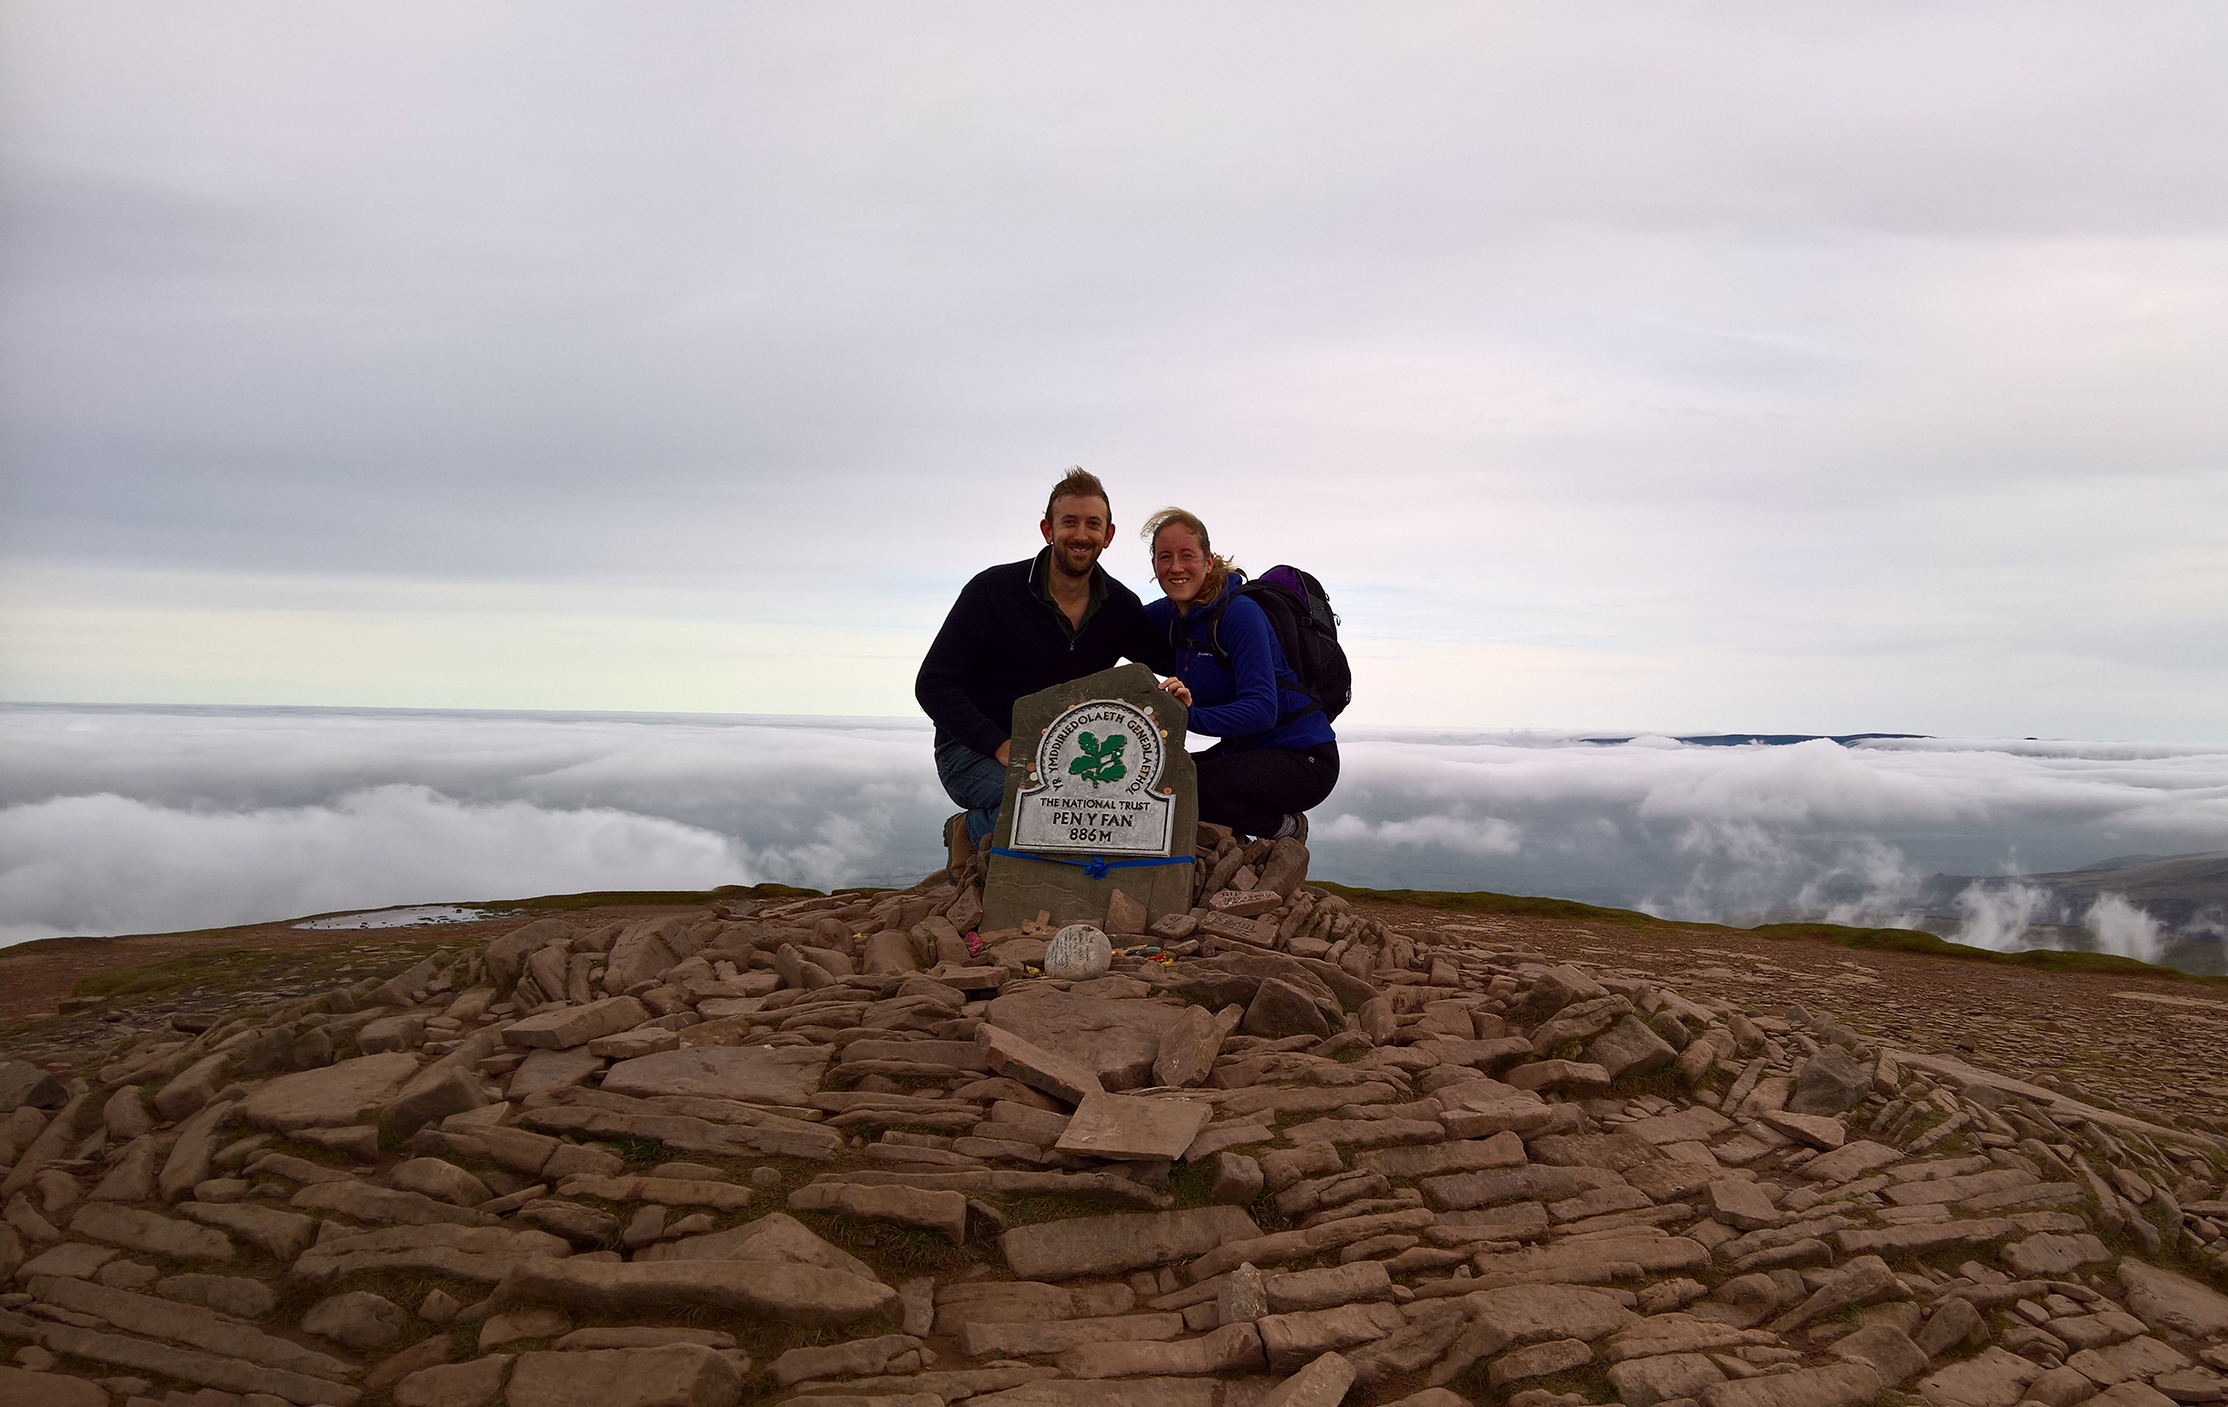 Hartpury’s equine events manager, Kathryn Megan, on Pen-y-Fan with her boyfriend, Jon Cadoux-Hudson, who has been helping to motivate her on the tougher walks!  